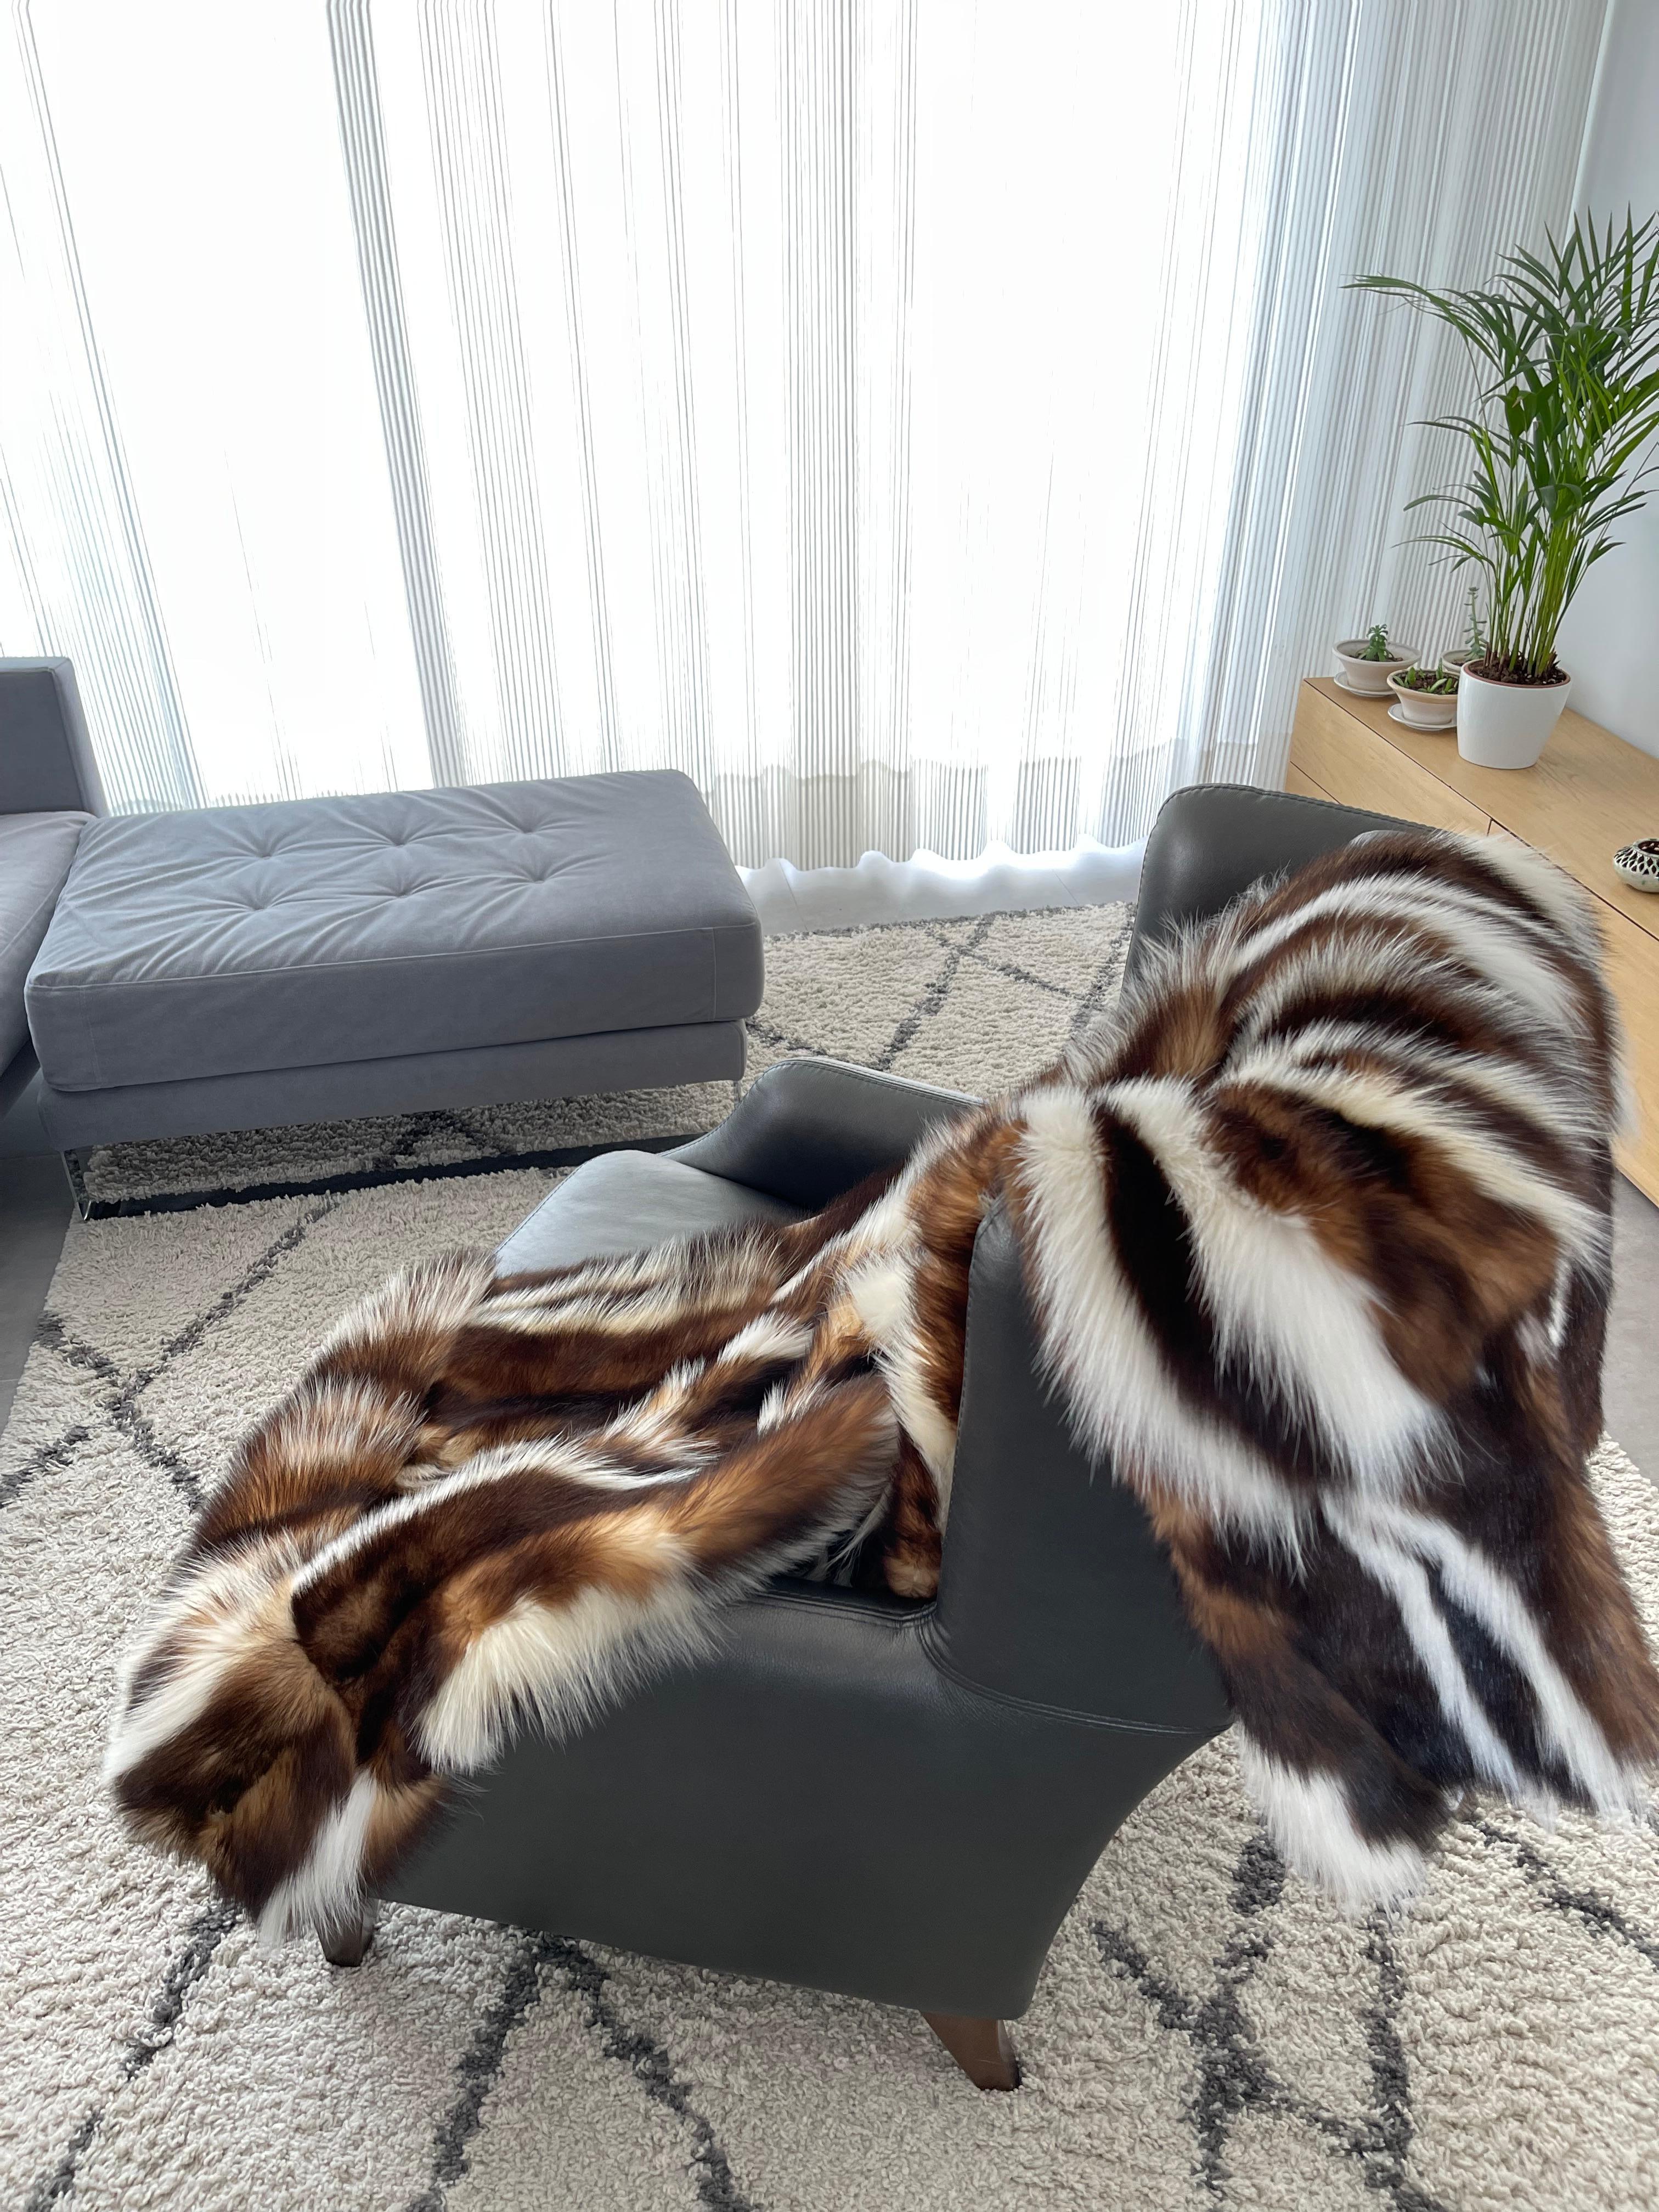 Contemporary Skunk Fur Bed / Sofa Throw Blanket. Merino Wool Backing For Sale